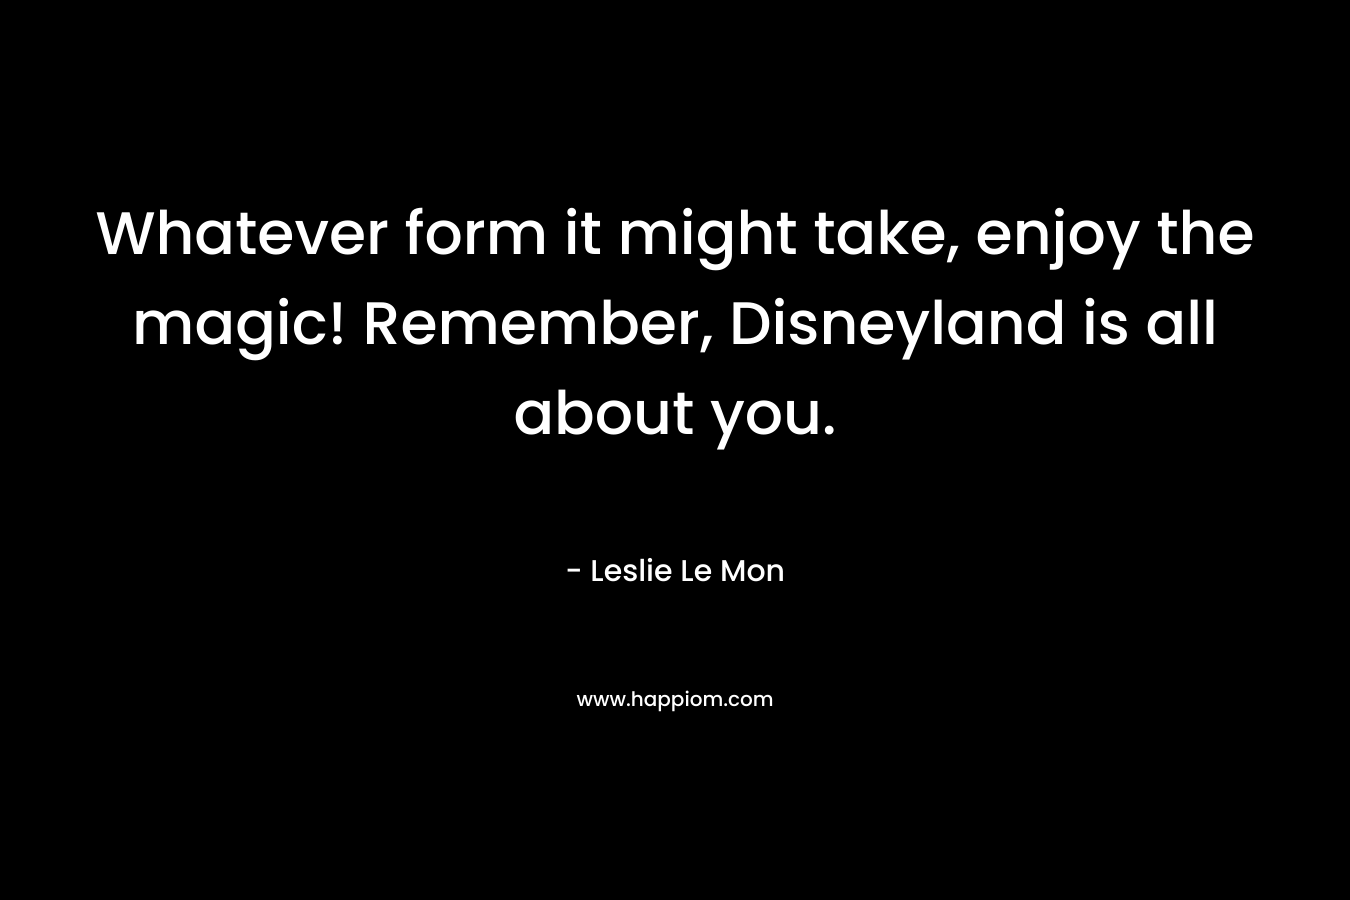 Whatever form it might take, enjoy the magic! Remember, Disneyland is all about you. – Leslie Le Mon